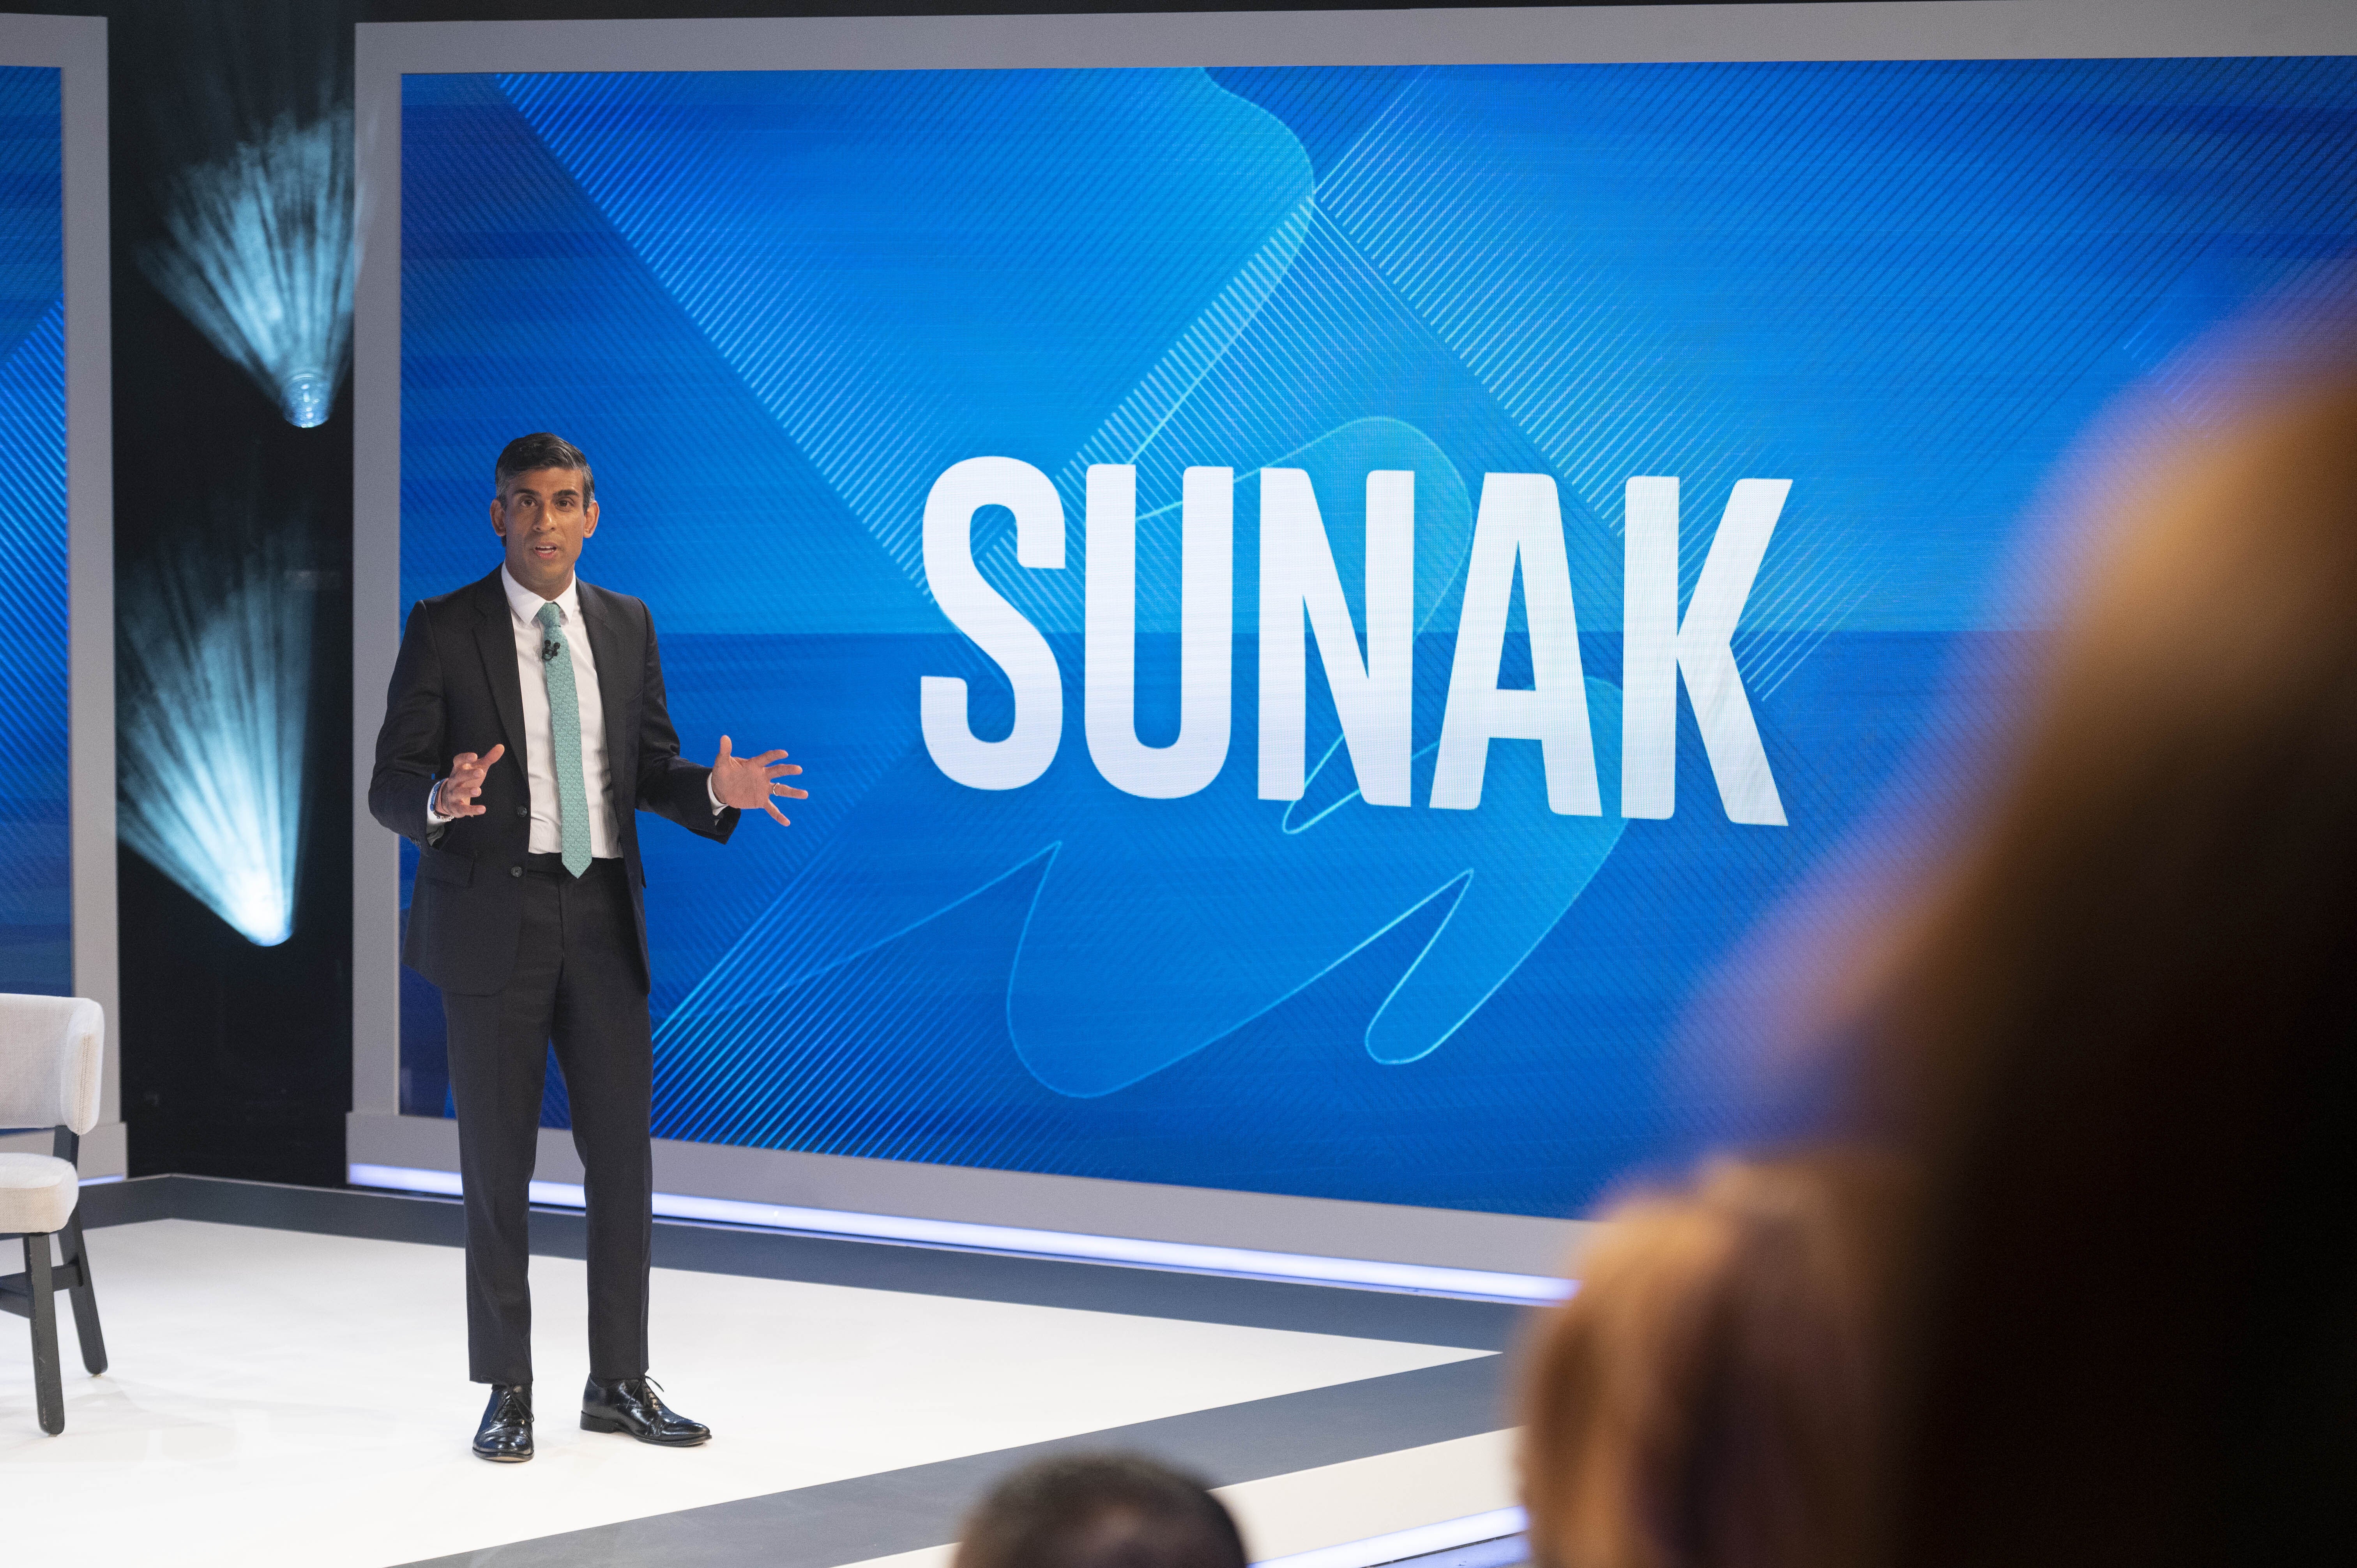 Rishi Sunak was the winner in the eyes of the Sky News audience